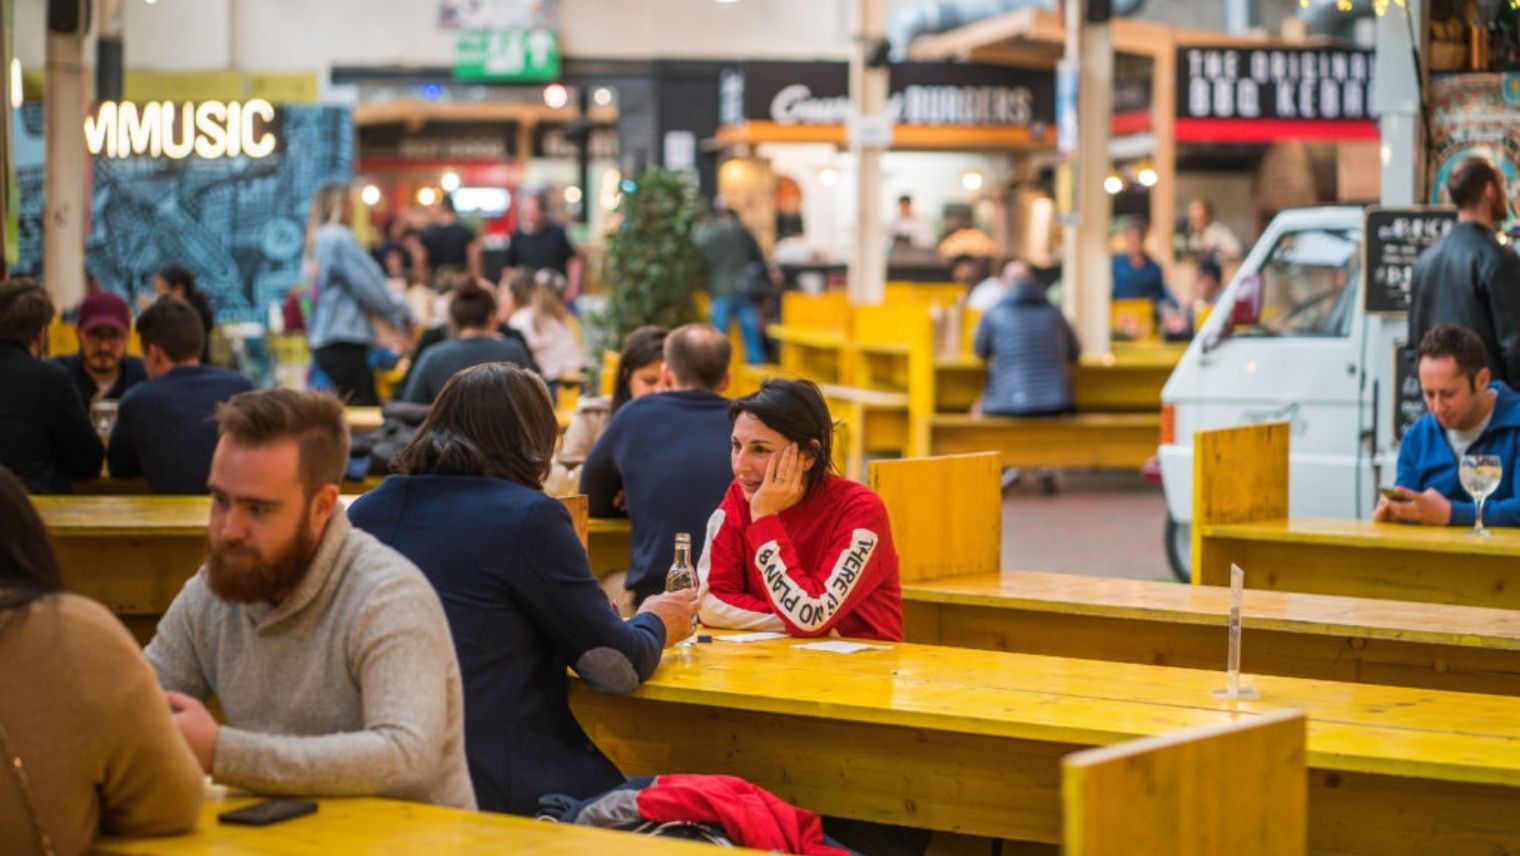 The food court at Mercato Metropolitano Elephant and Castle